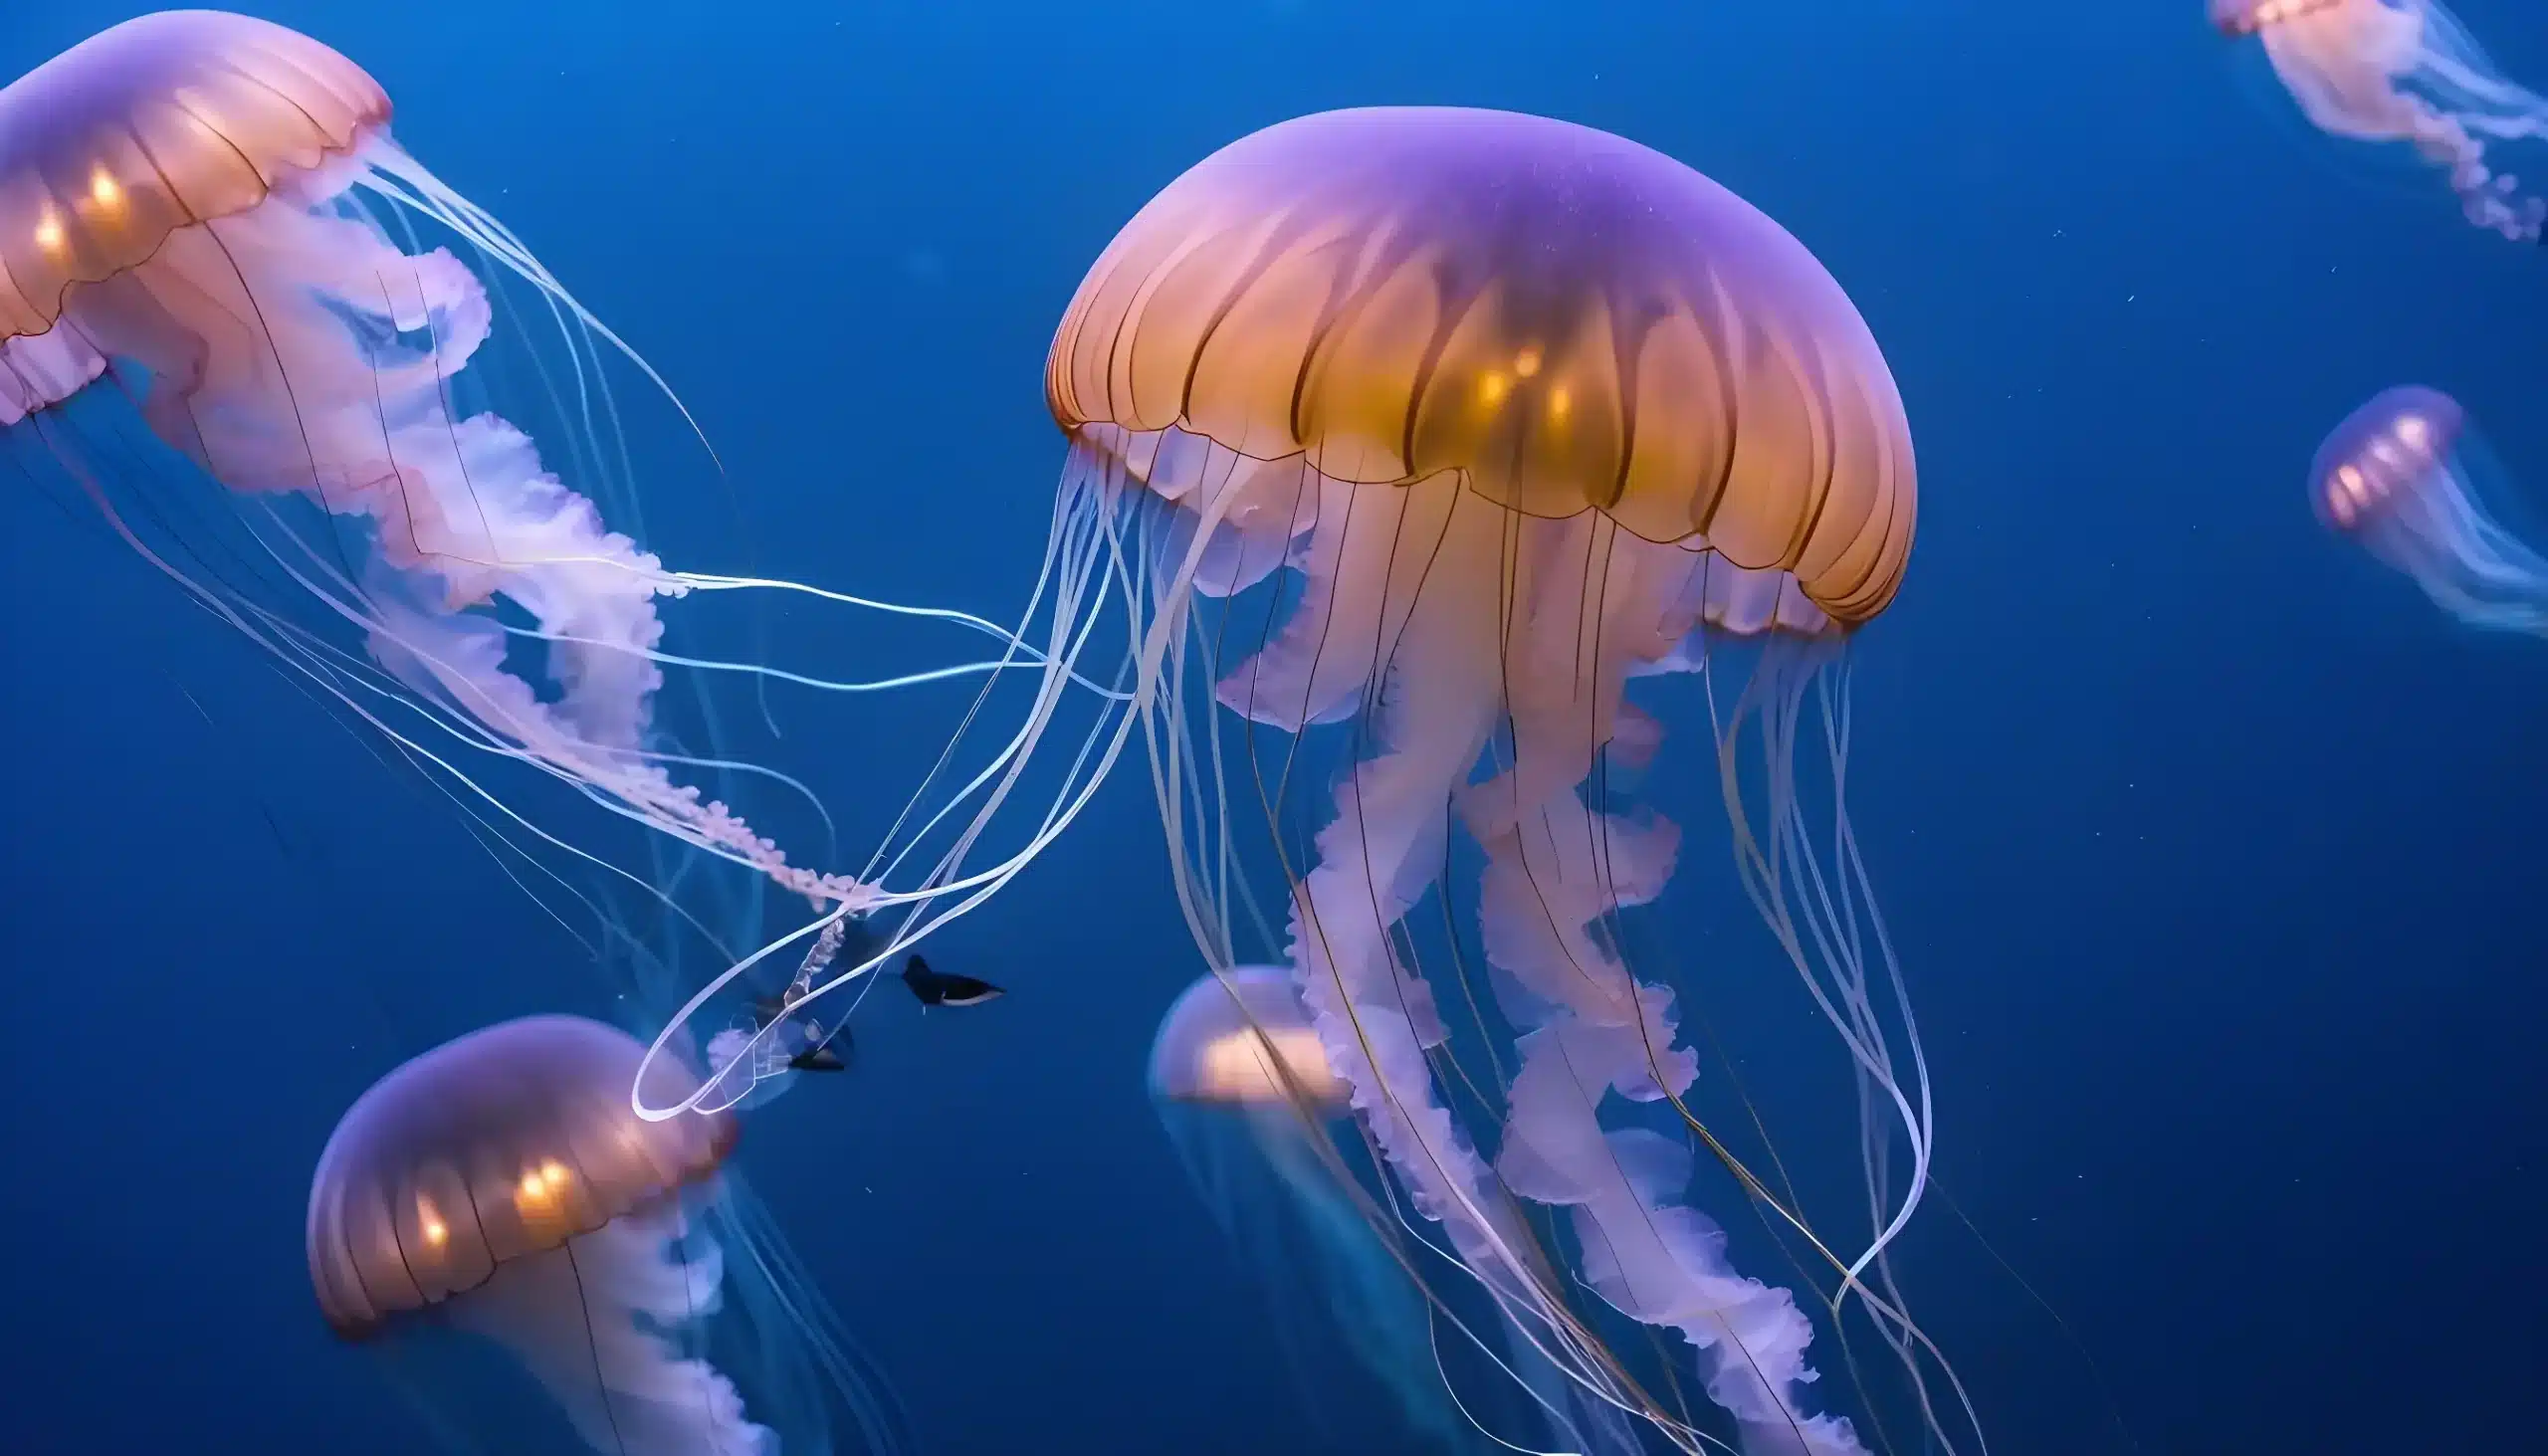 Dive into Ethereal Realm of Jellyfish